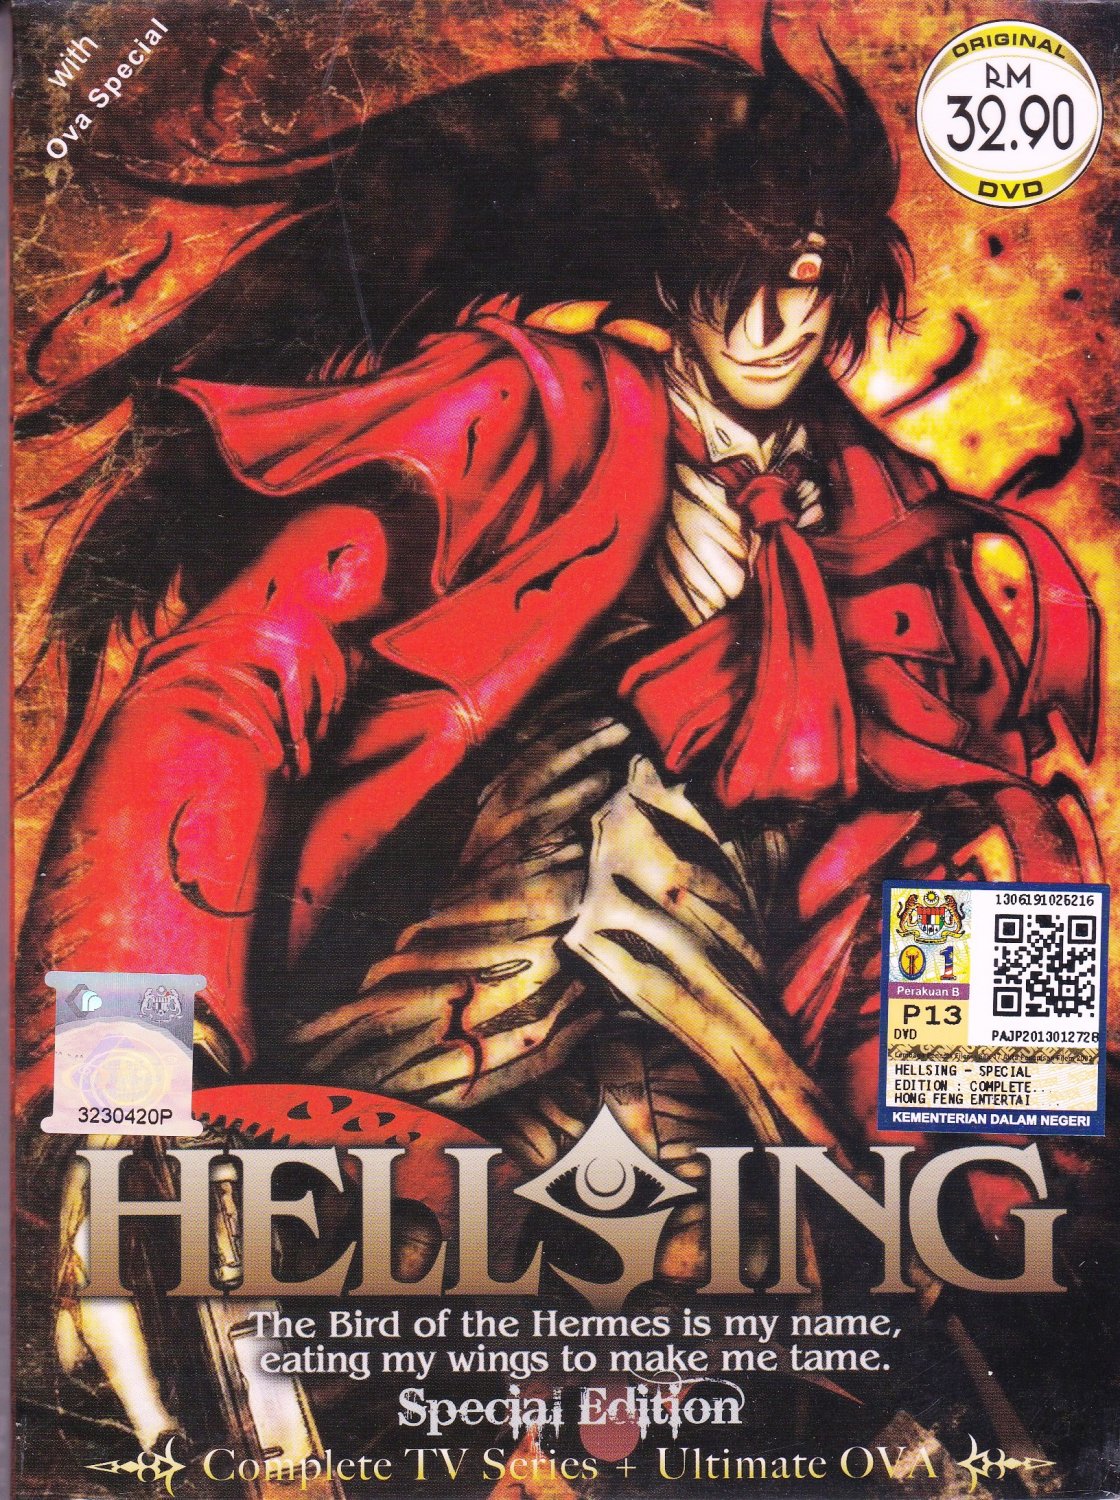 DVD ANIME HELLSING Special Edition Complete TV Series + Ultimate OVA